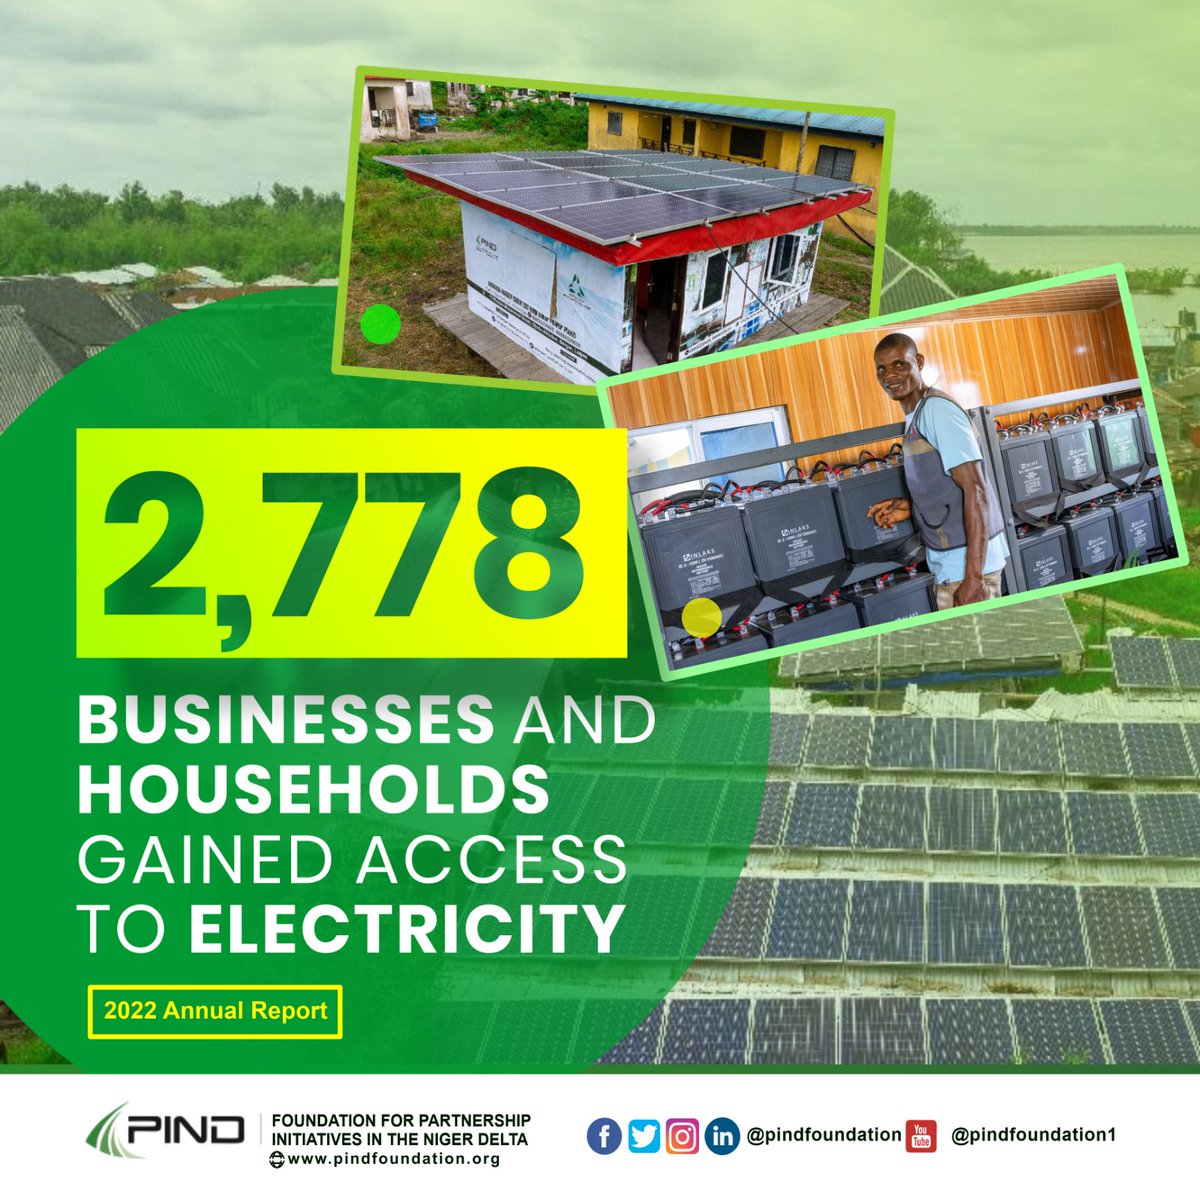 The hard-to-reach coastal communities in the Niger Delta region suffer poor electrification. Due to their location, most of these communities are off the national grid. Some have never had access to electricity. Since 2018, PIND has tackled this issue by facilitating alternative https://t.co/NQVE810key